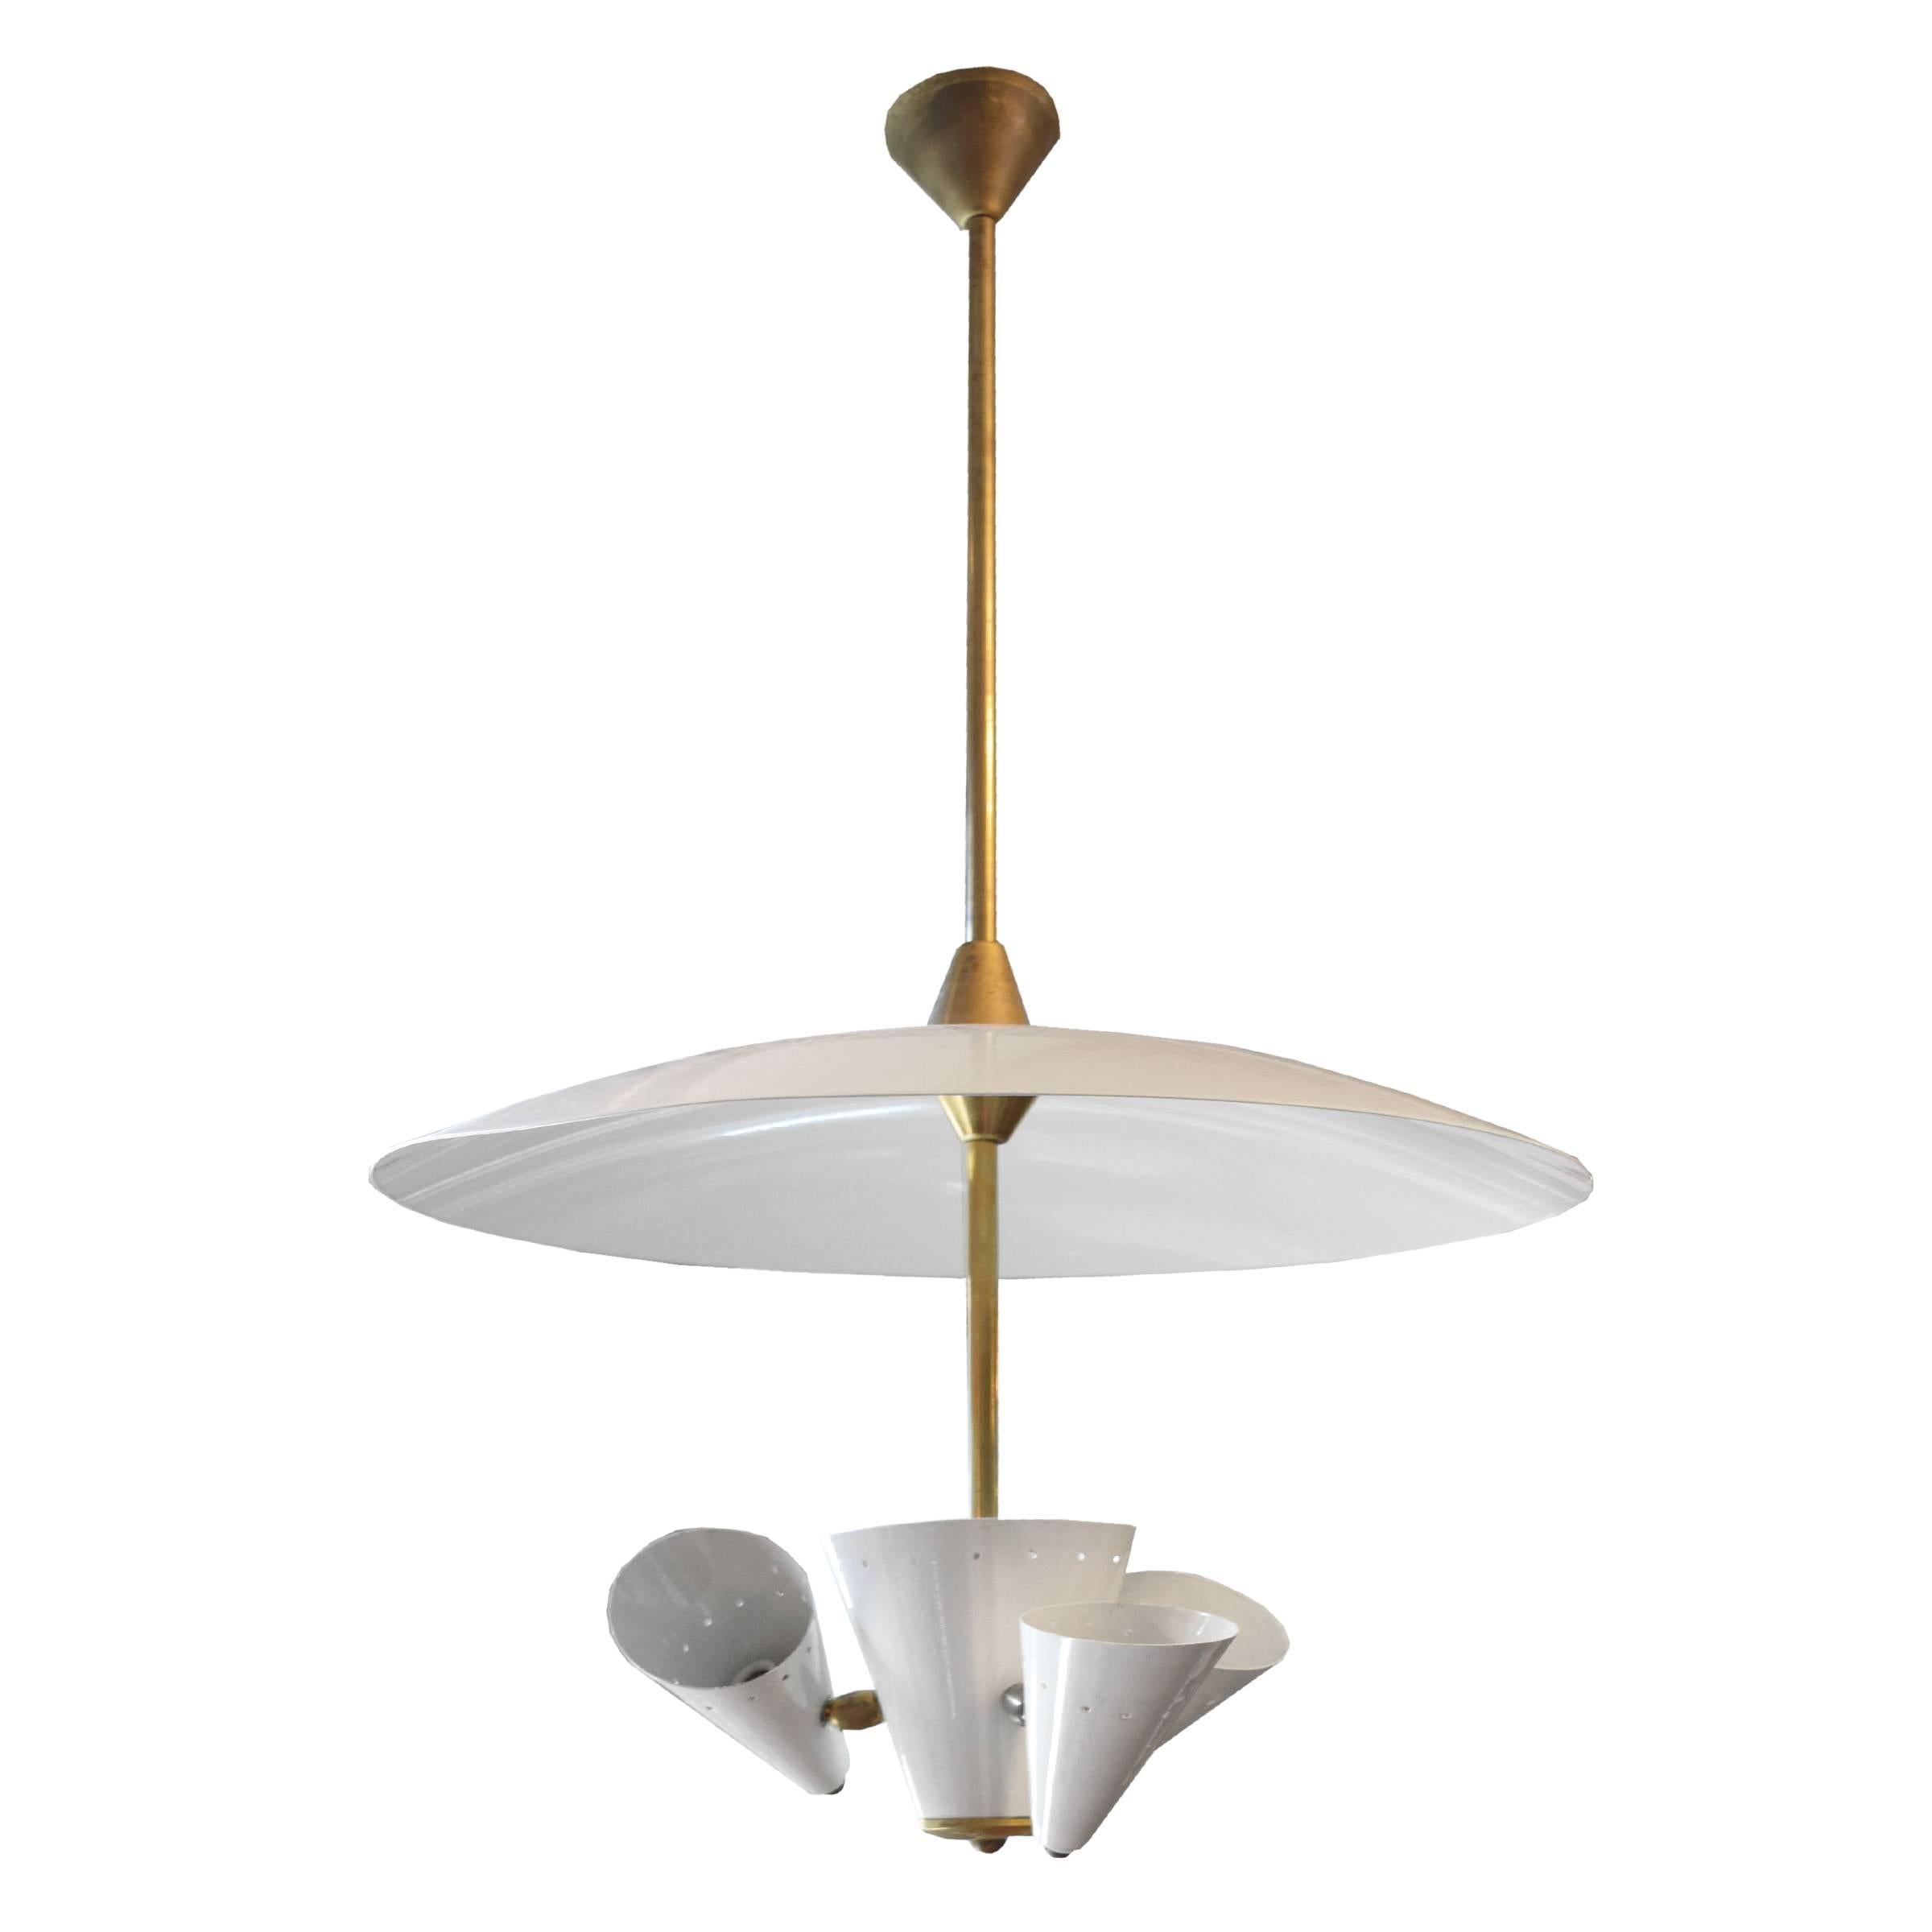 An Italian Mid-Century chandelier with a brass downrod, white enamel dome shade and three pivoting conical shades with perforated detail, Italian three-light chandelier 

Requires rewiring.